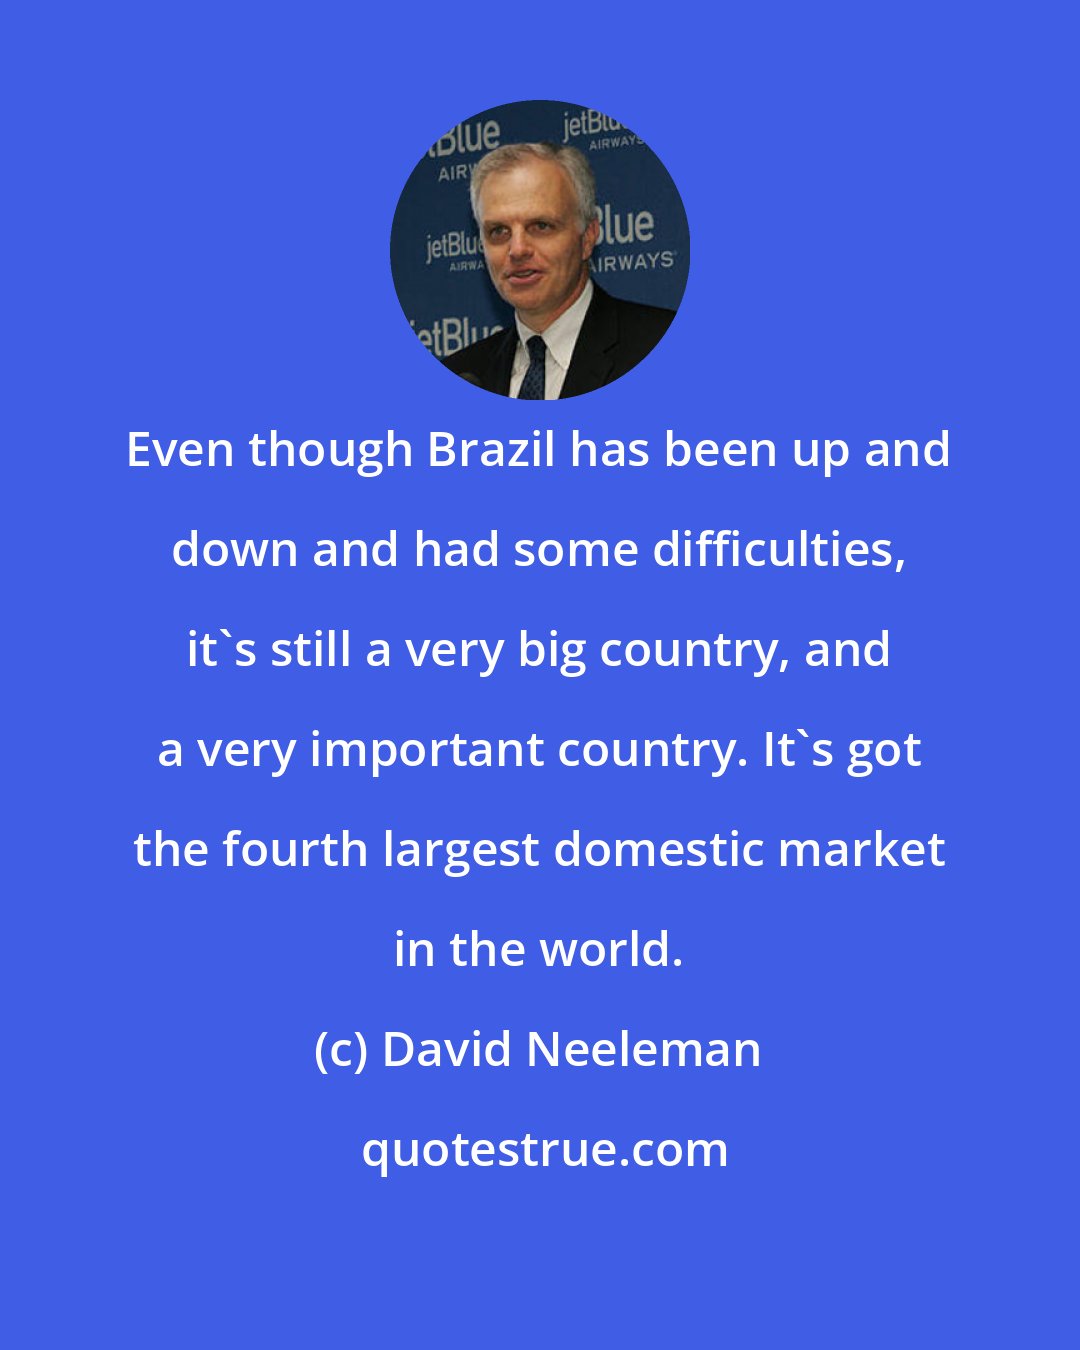 David Neeleman: Even though Brazil has been up and down and had some difficulties, it's still a very big country, and a very important country. It's got the fourth largest domestic market in the world.